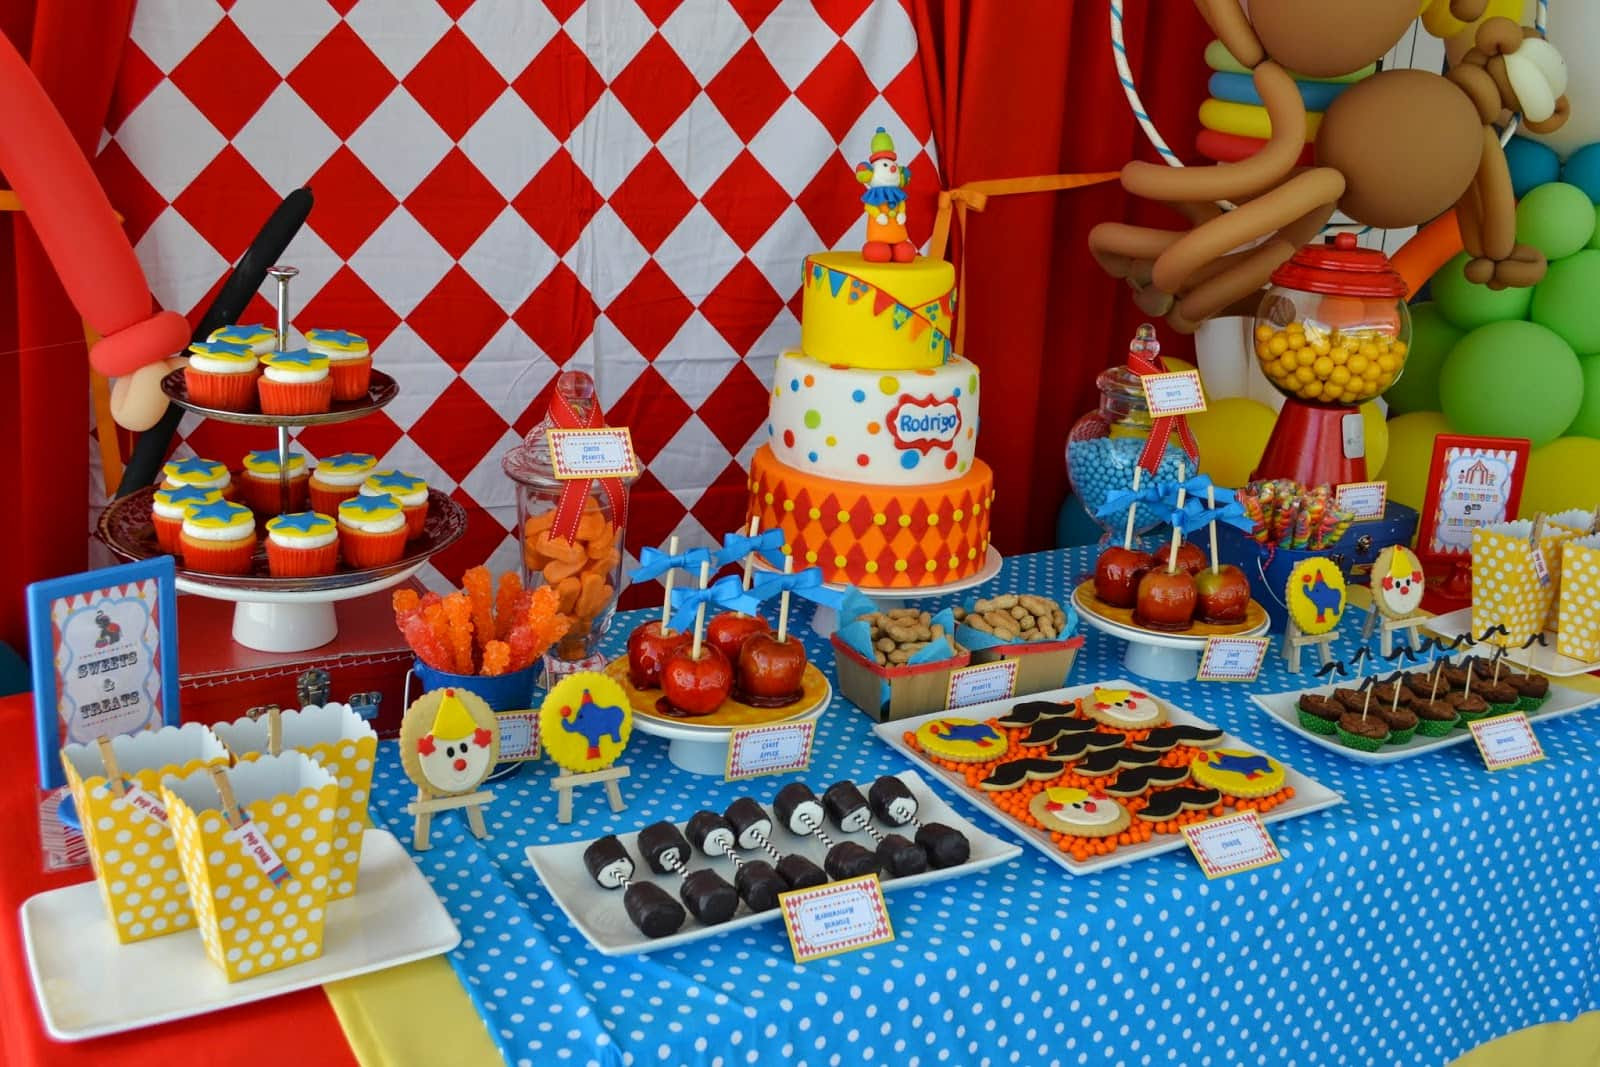 Birthday Party Ideas For 3 Year Old Boy
 33 Awesome Birthday Party Ideas for Boys